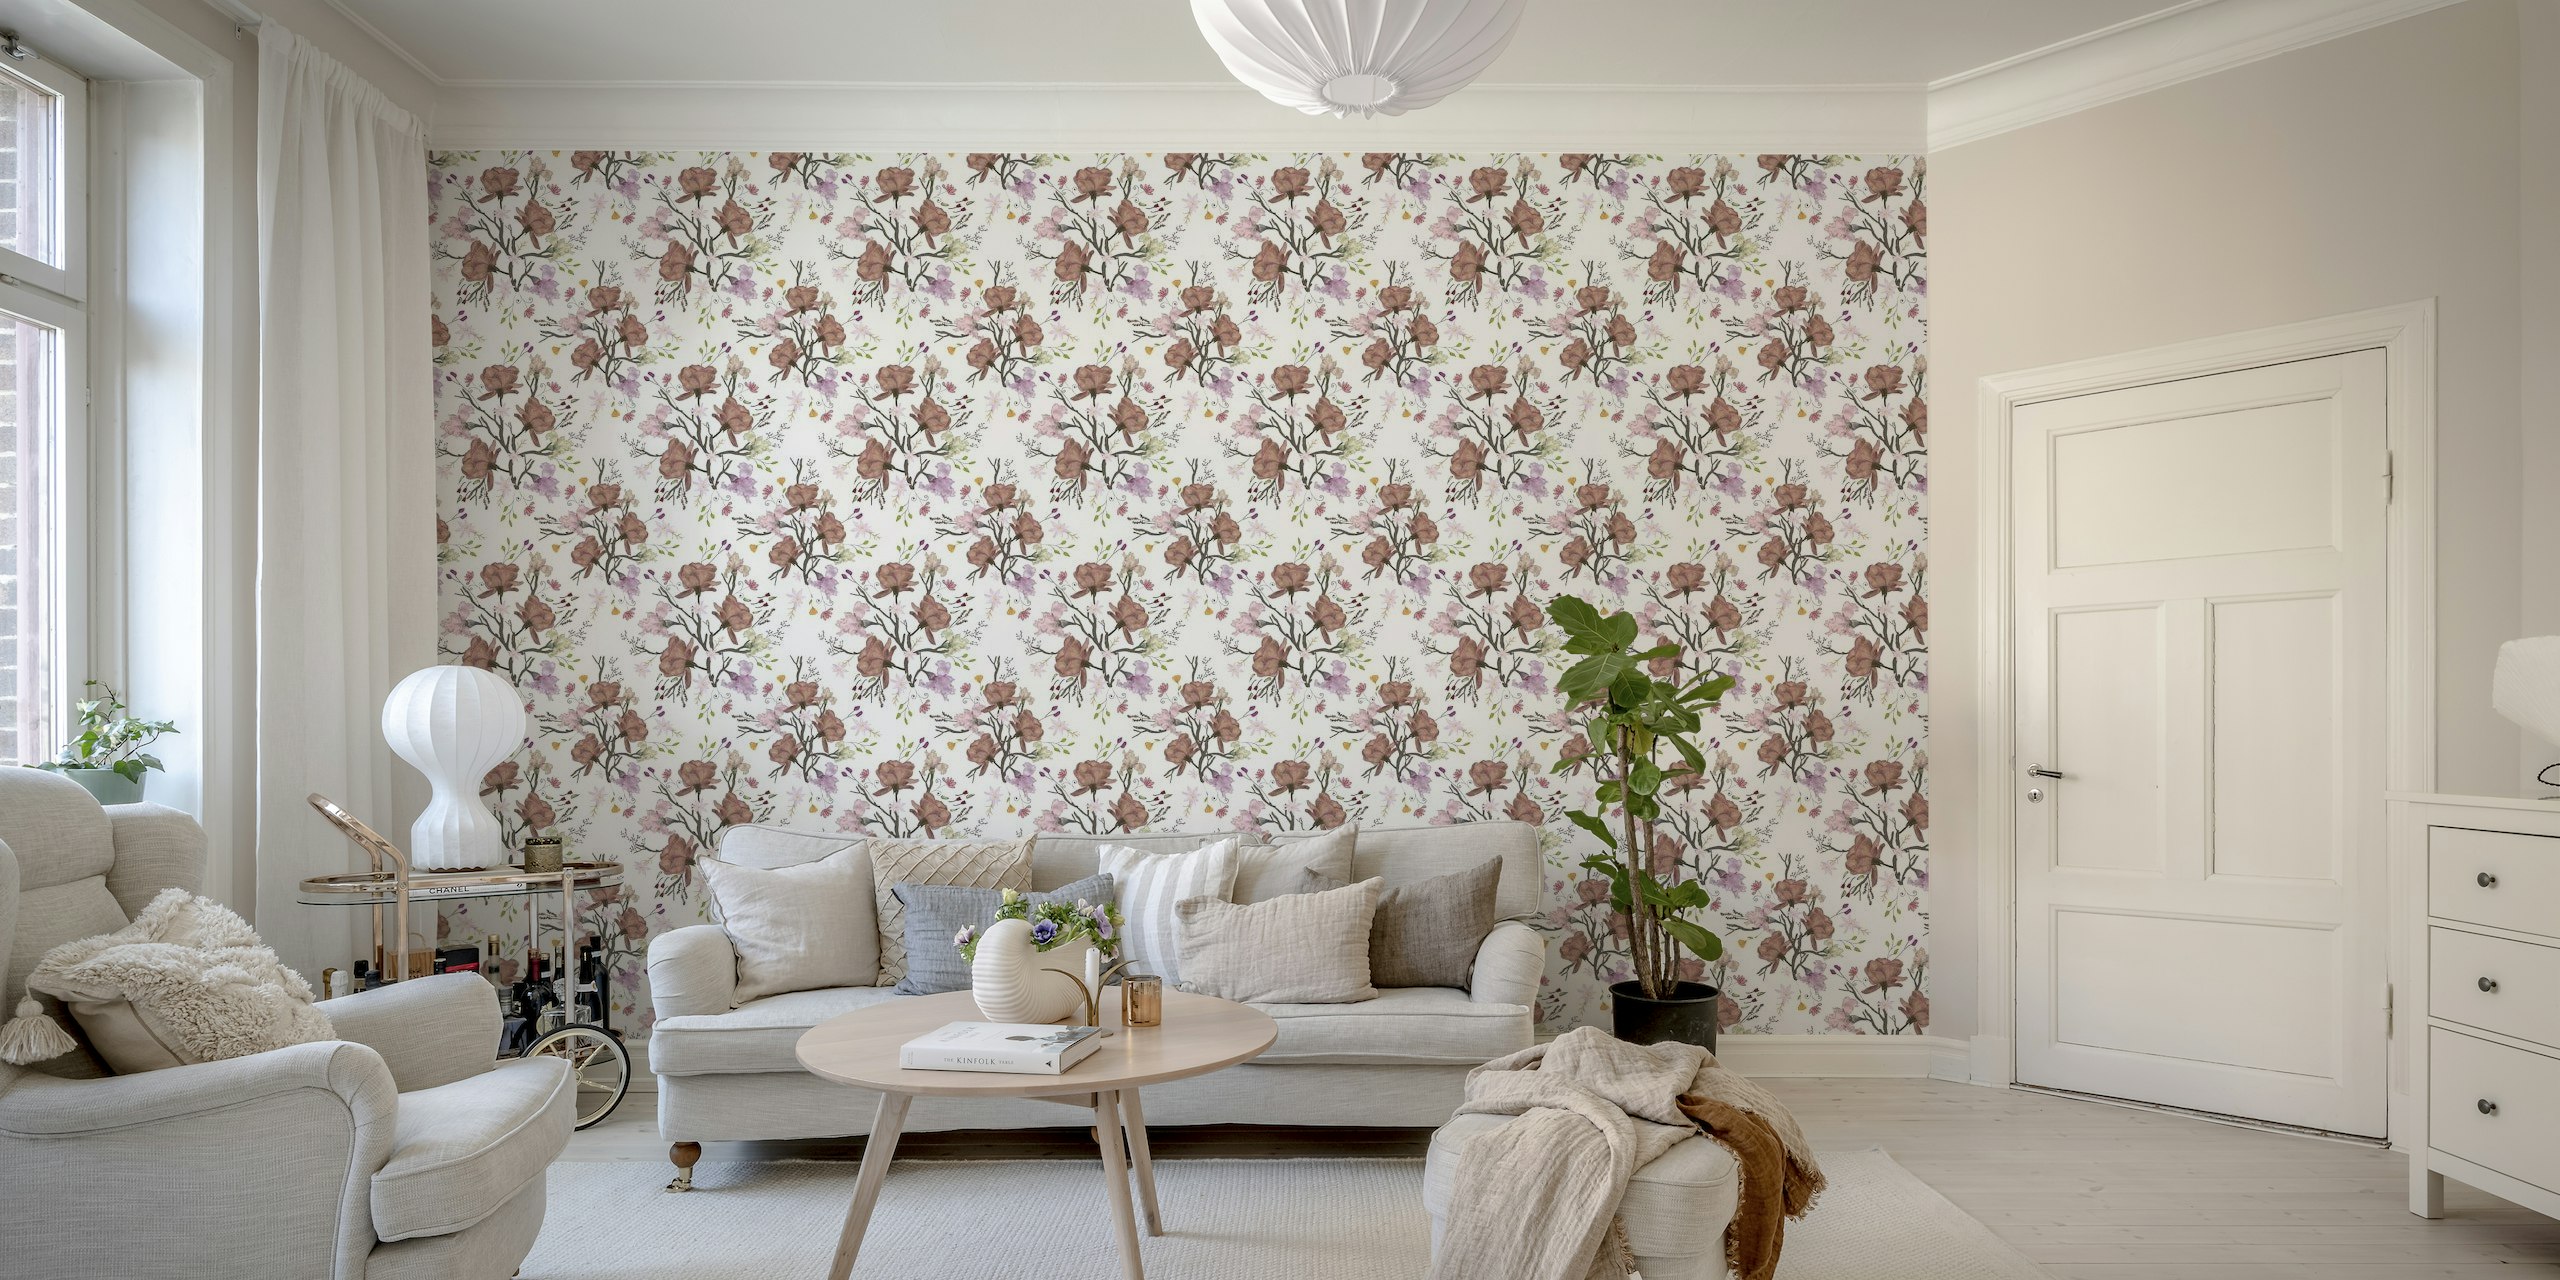 Floral Flourish Pattern With Roses and Iris Flower wallpaper